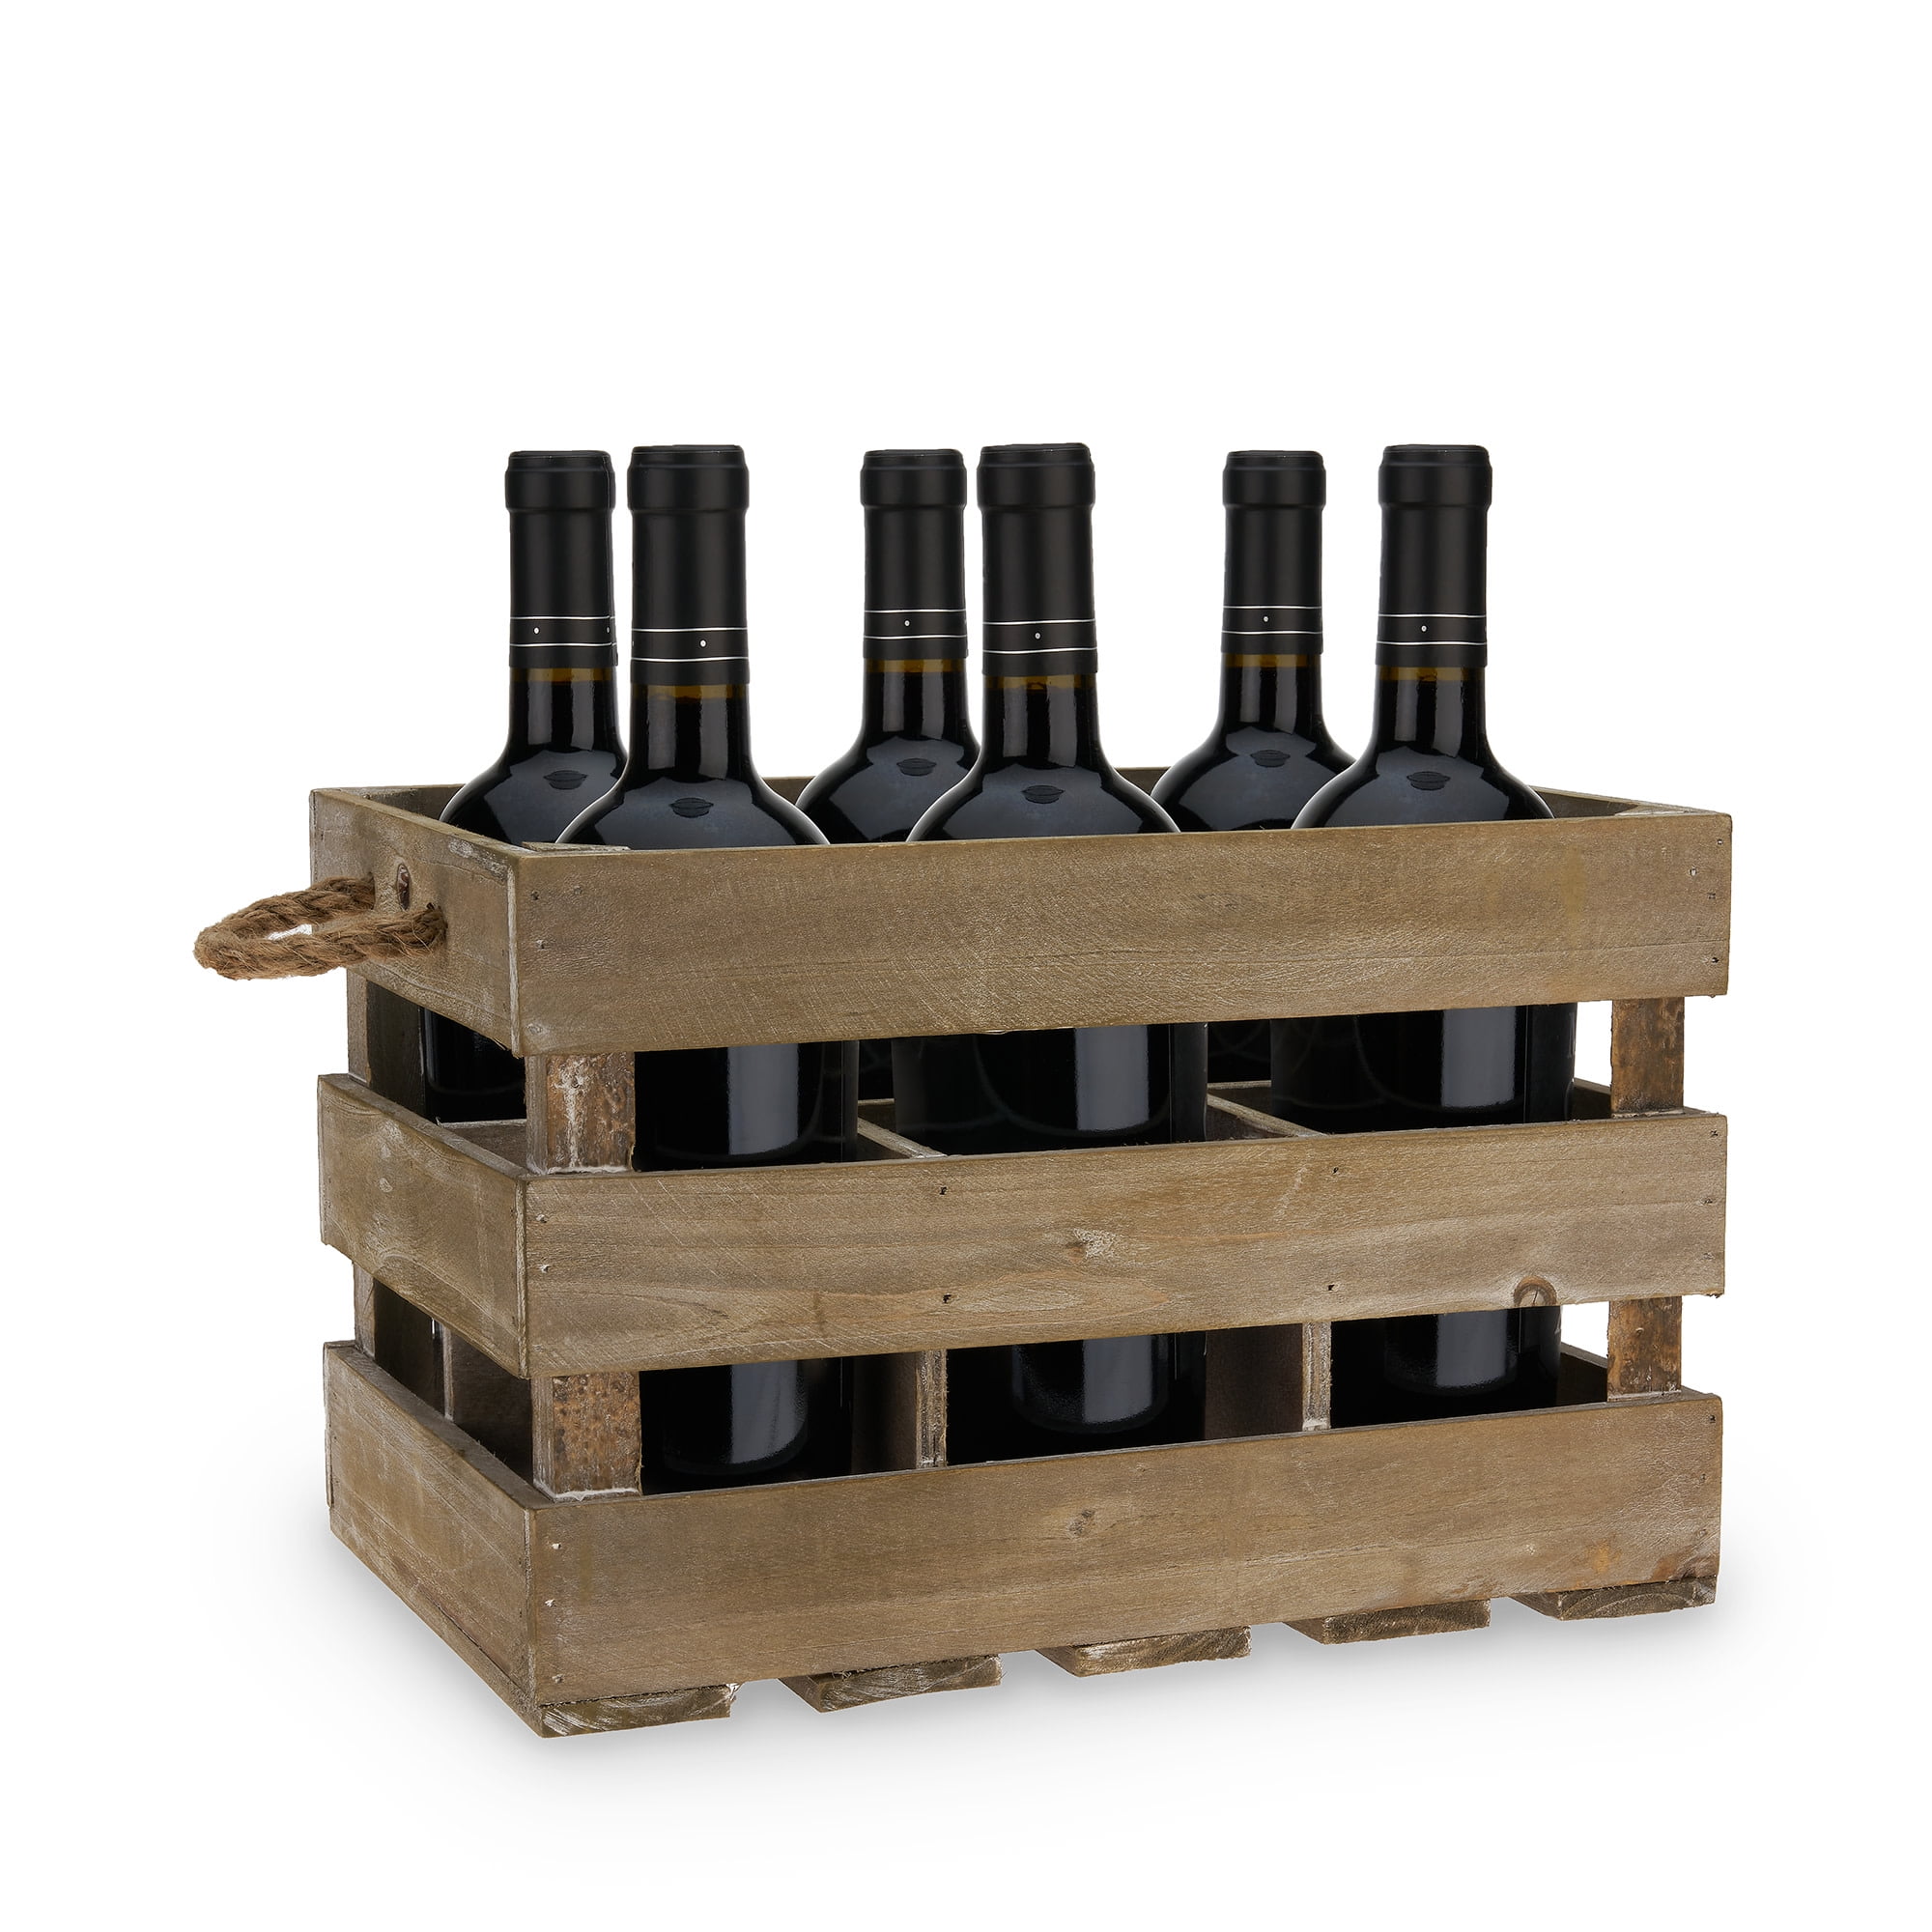 Wooden Box Wine Crate Wine Crate Chest Apple Crate Wine Rack Fruit Crate 